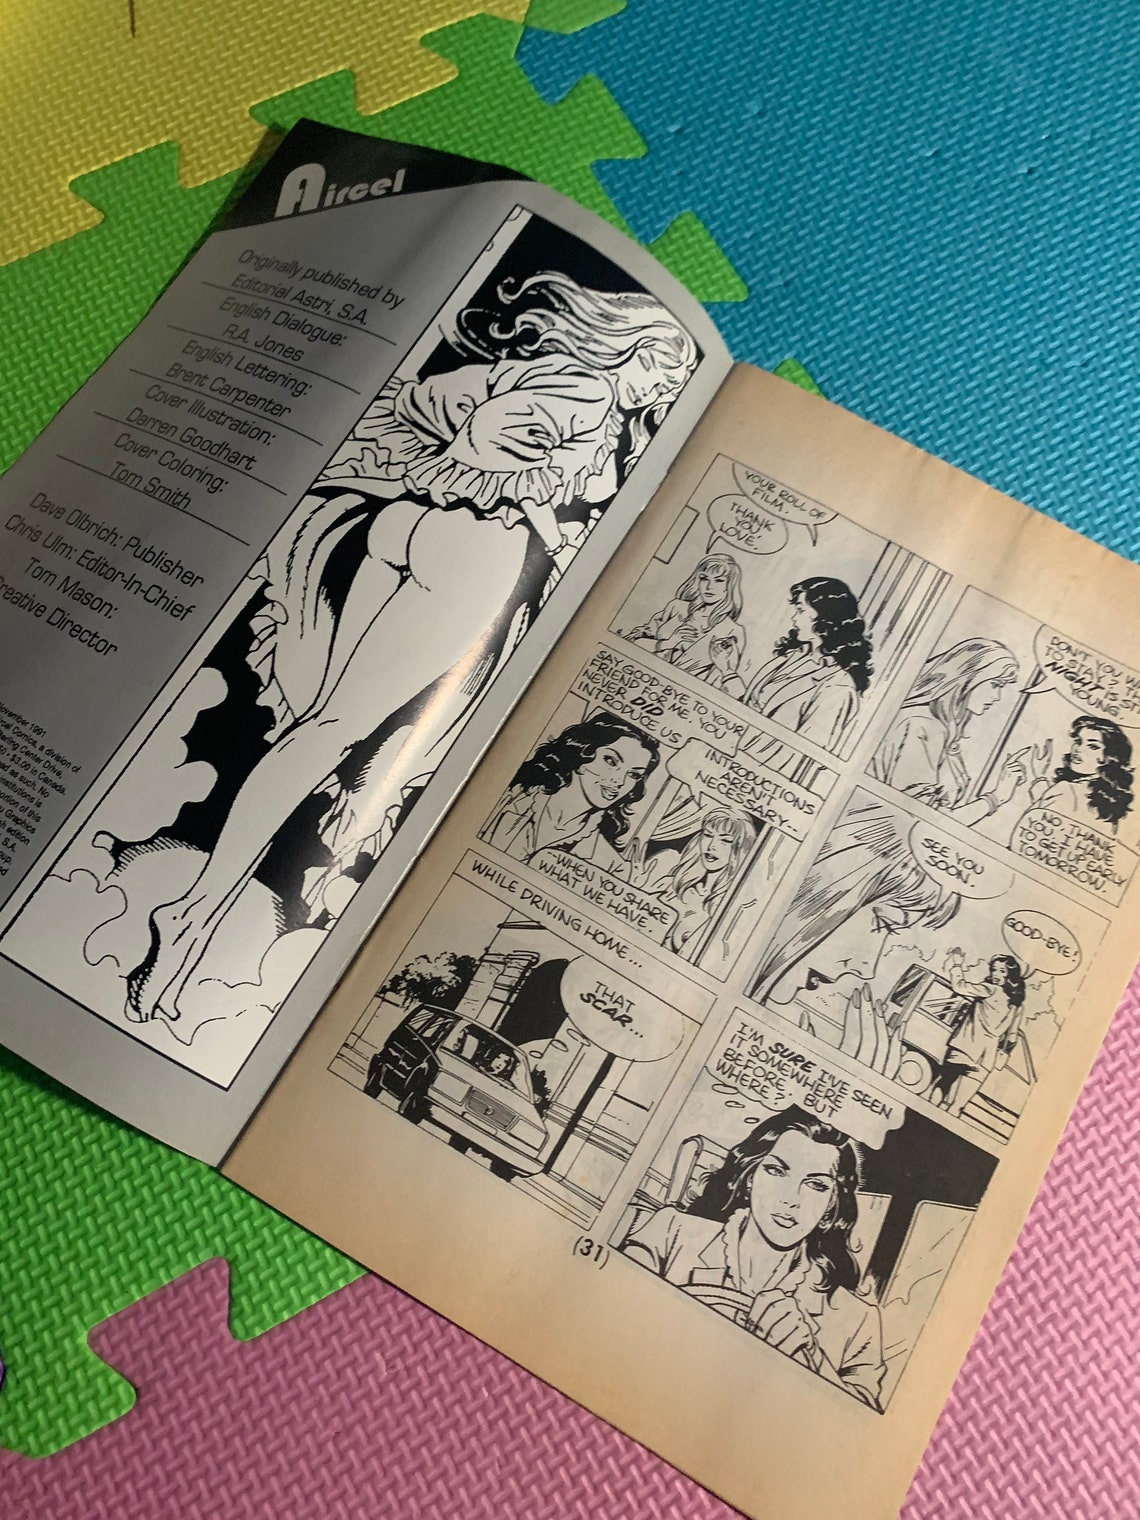 Final Taboo Adult Erotic Sex And Drugs Comic Books S 1 And 2 Etsy